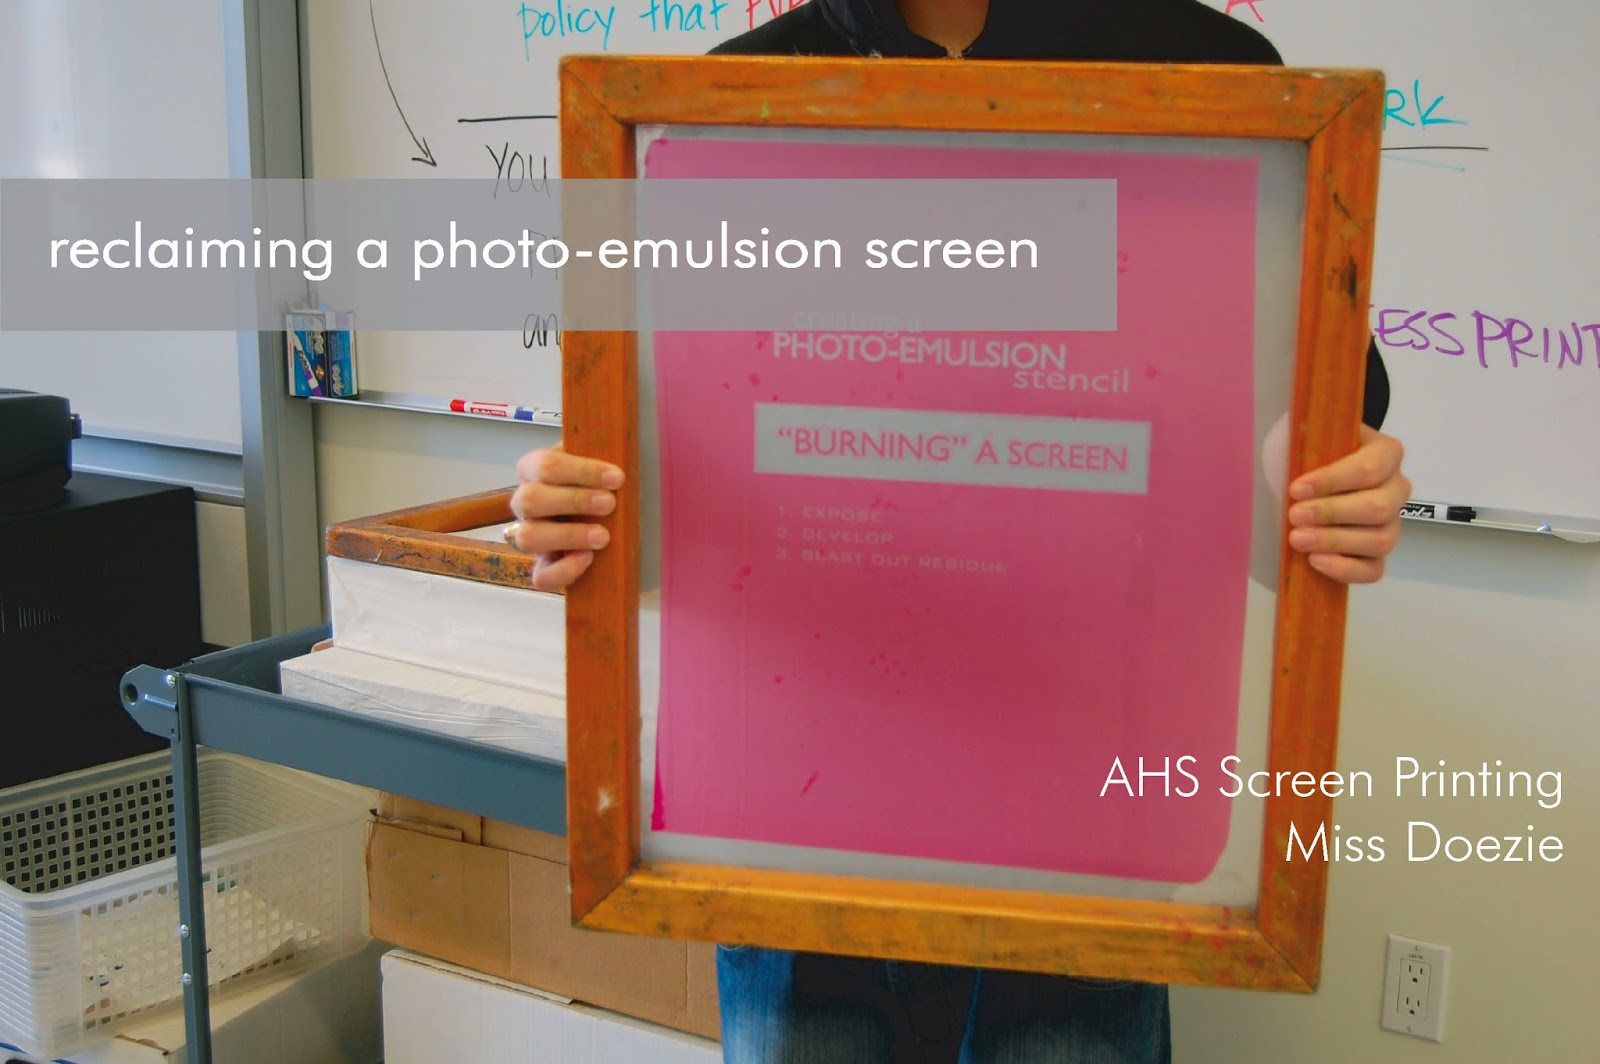 Cleaning a Screen and Removing Emulsion (Screen Printing)